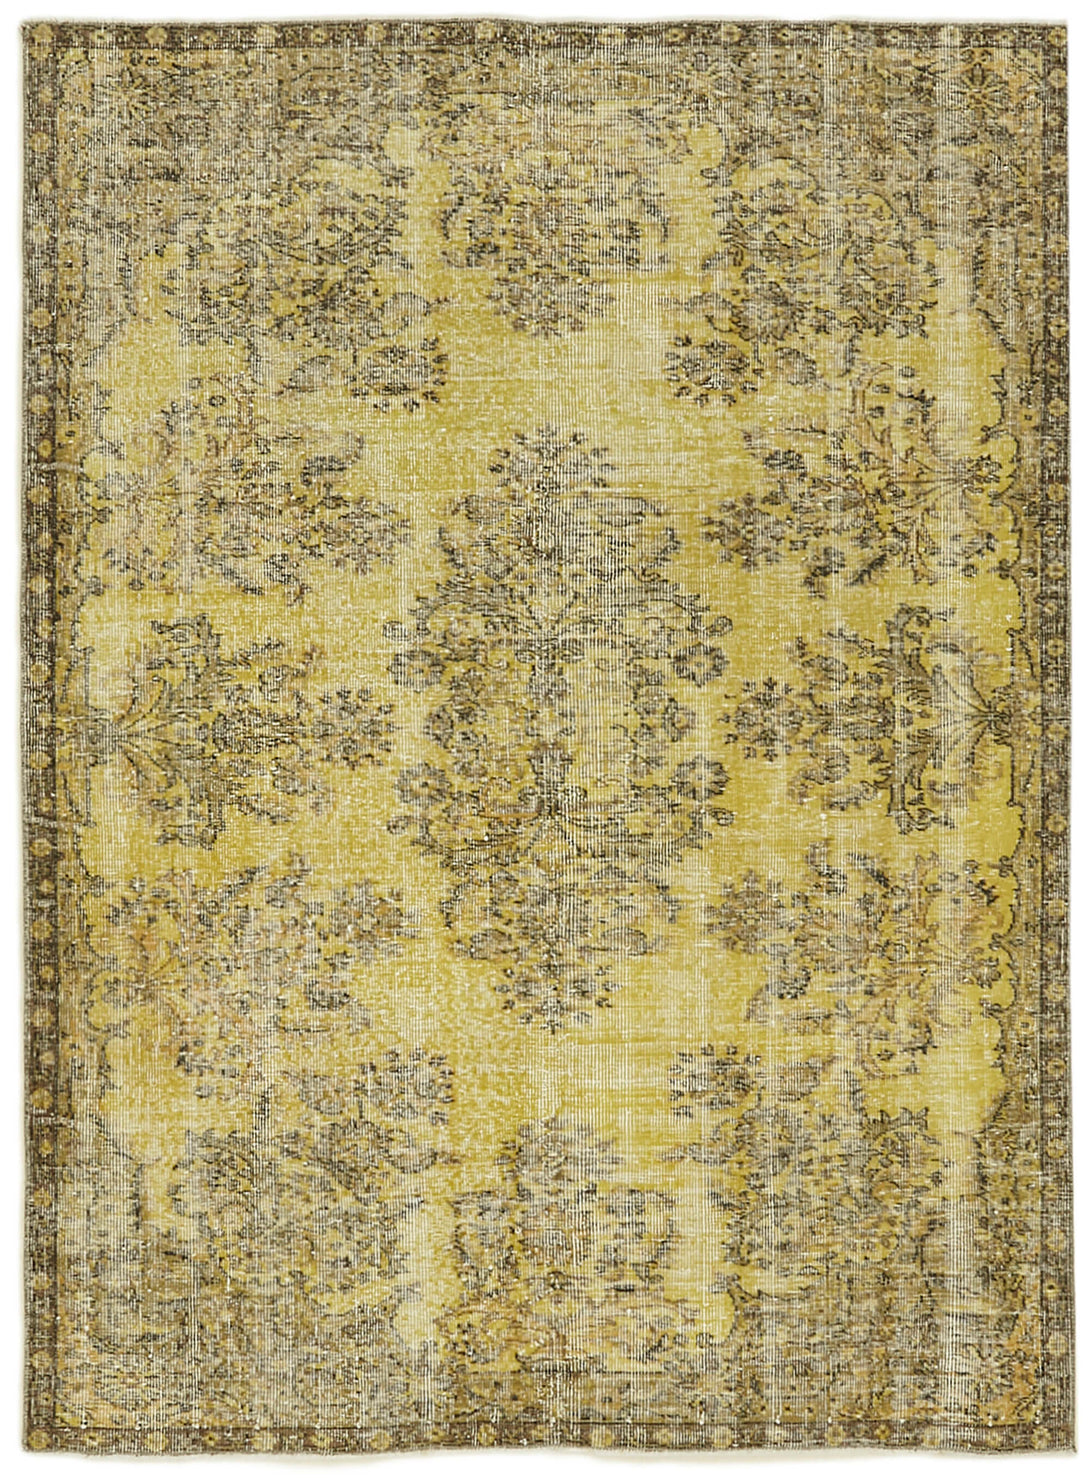 Handmade Overdyed Area Rug > Design# OL-AC-41176 > Size: 5'-6" x 7'-5", Carpet Culture Rugs, Handmade Rugs, NYC Rugs, New Rugs, Shop Rugs, Rug Store, Outlet Rugs, SoHo Rugs, Rugs in USA